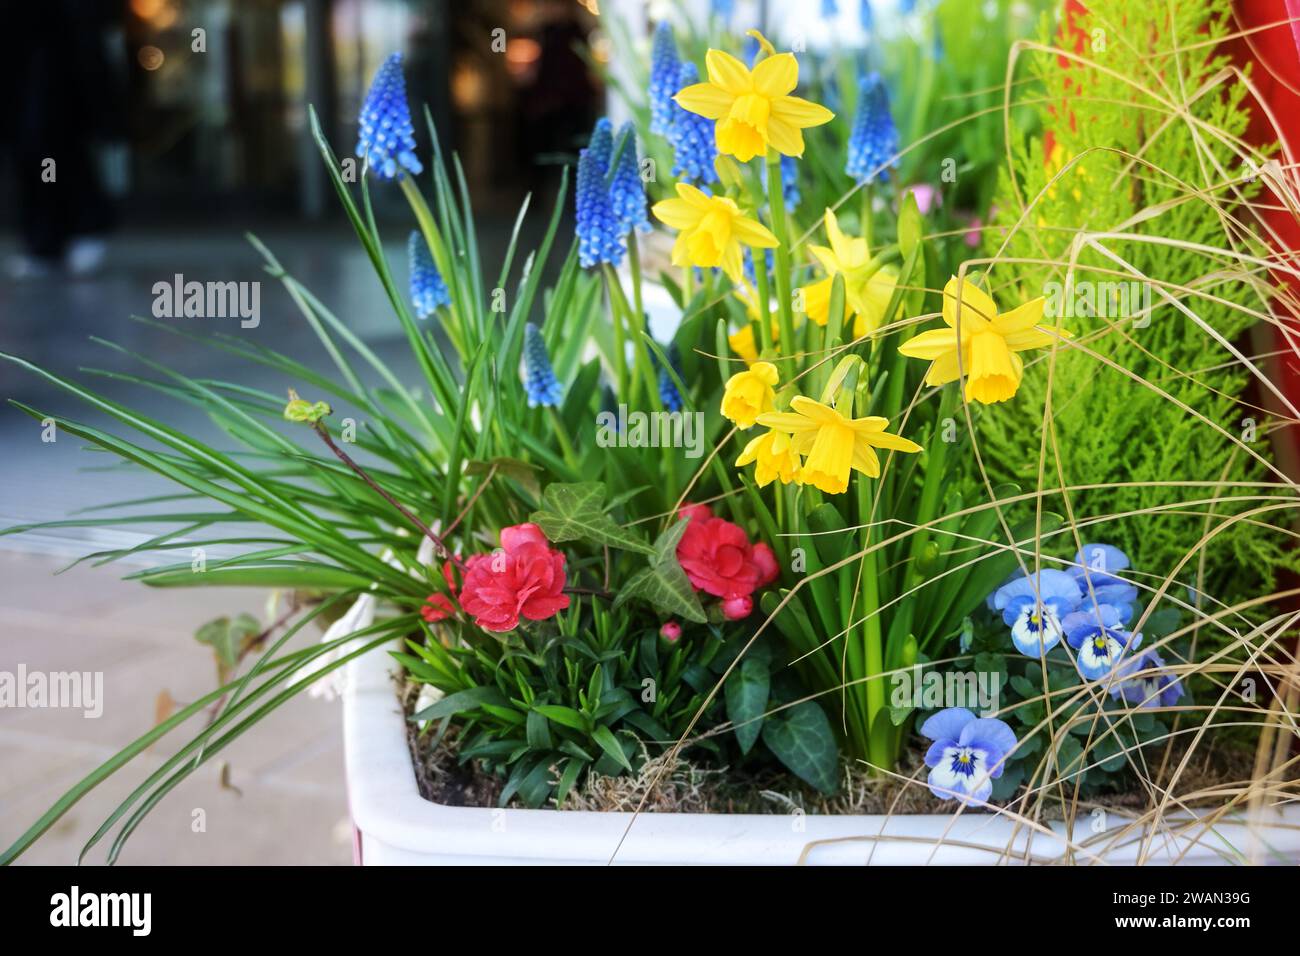 Potted spring flowers like daffodils and grape hyacinths on the street as colorful Easter decoration in the city, copy space, selected focus, narrow d Stock Photo